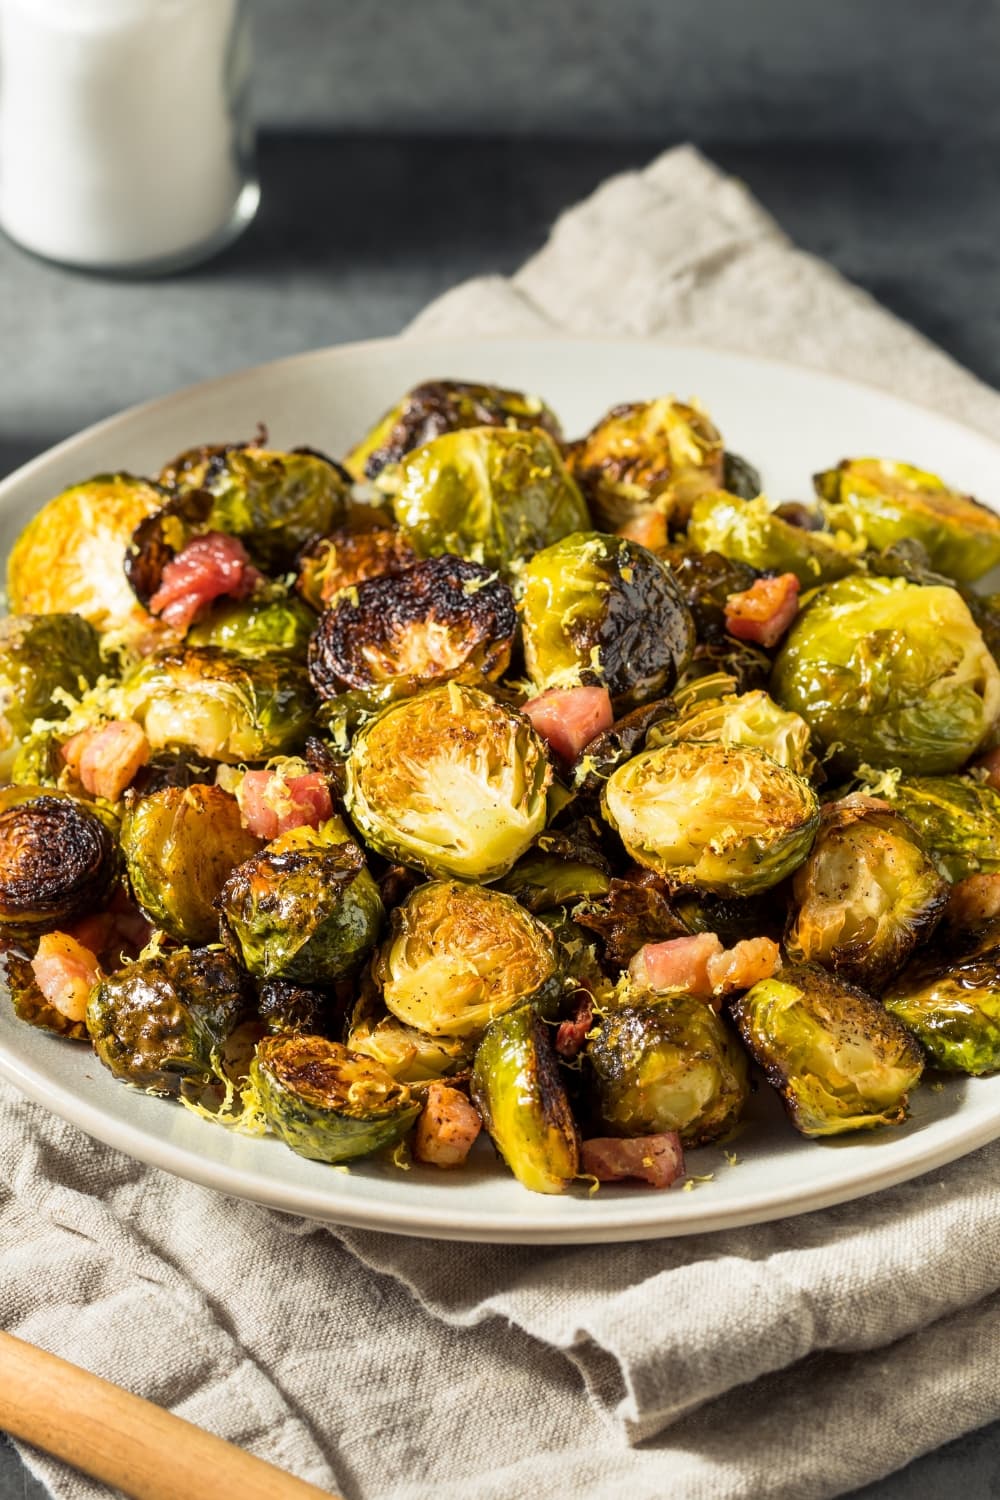 Home Cooked Baked Brussel Sprouts with Pancetta Served on a White Plate